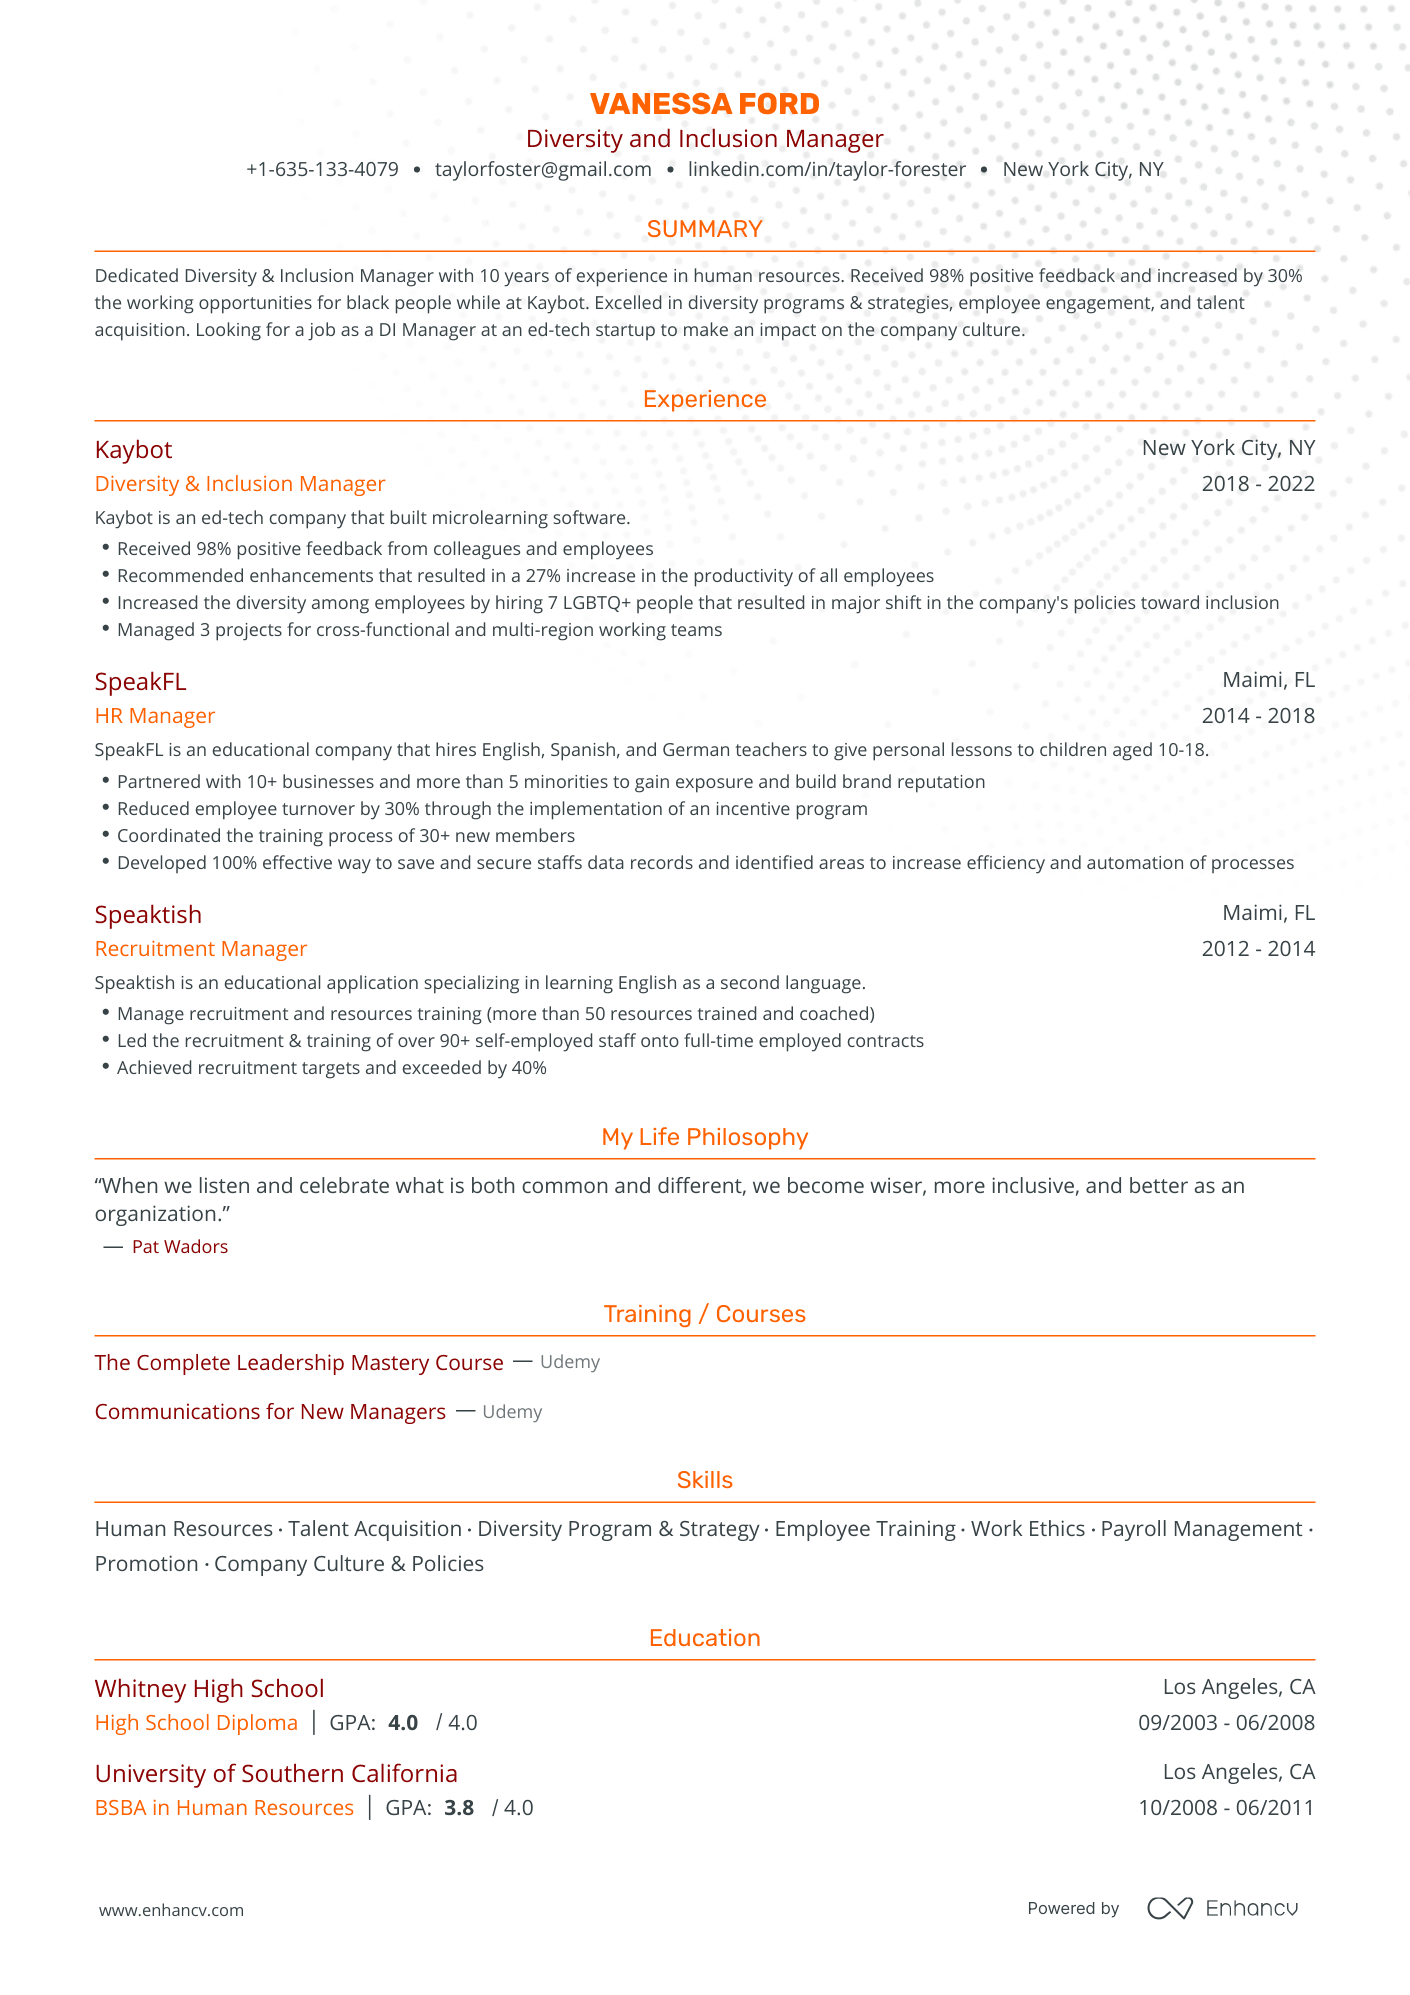 Traditional Diversity & Inclusion Manager Resume Template